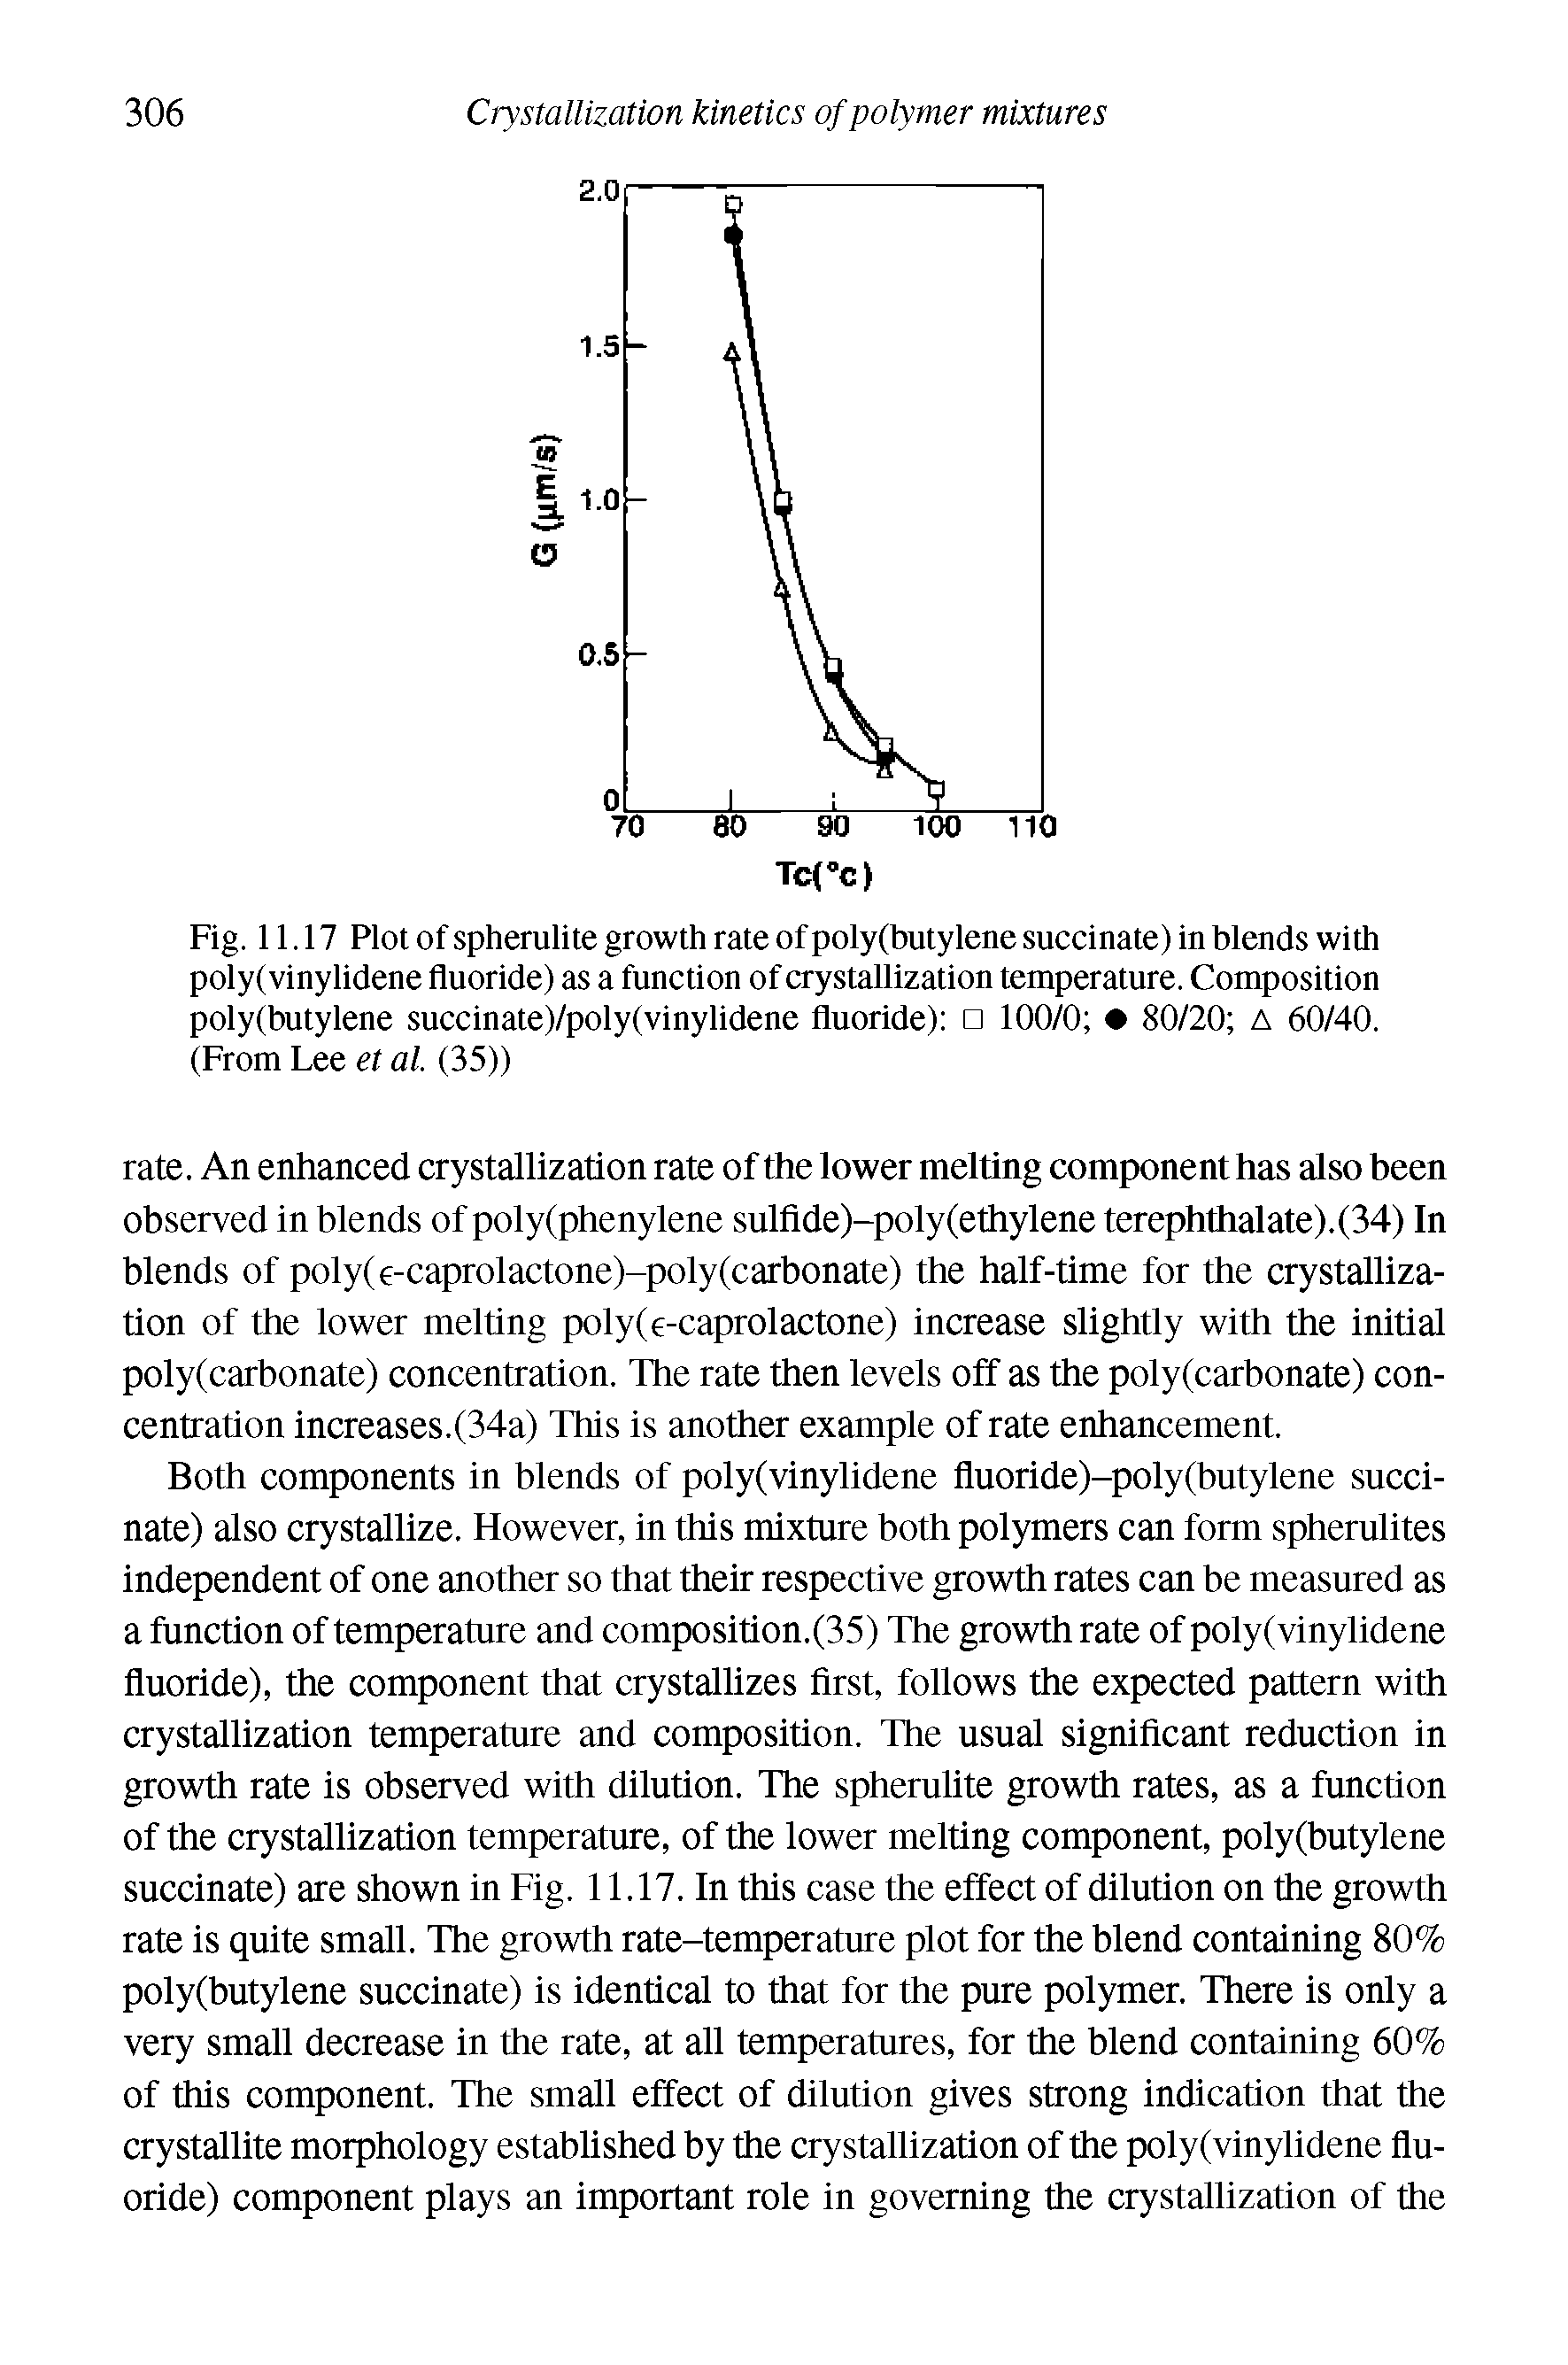 Fig. 11.17 Plot of spherulite growth rate of poly(butylene succinate) in blends with poly(vinylidene fluoride) as a function of crystallization temperature. Composition poly(butylene succinate)/poly(vinylidene fluoride) 100/0 80/20 a 60/40. (From Lee et al. (35))...